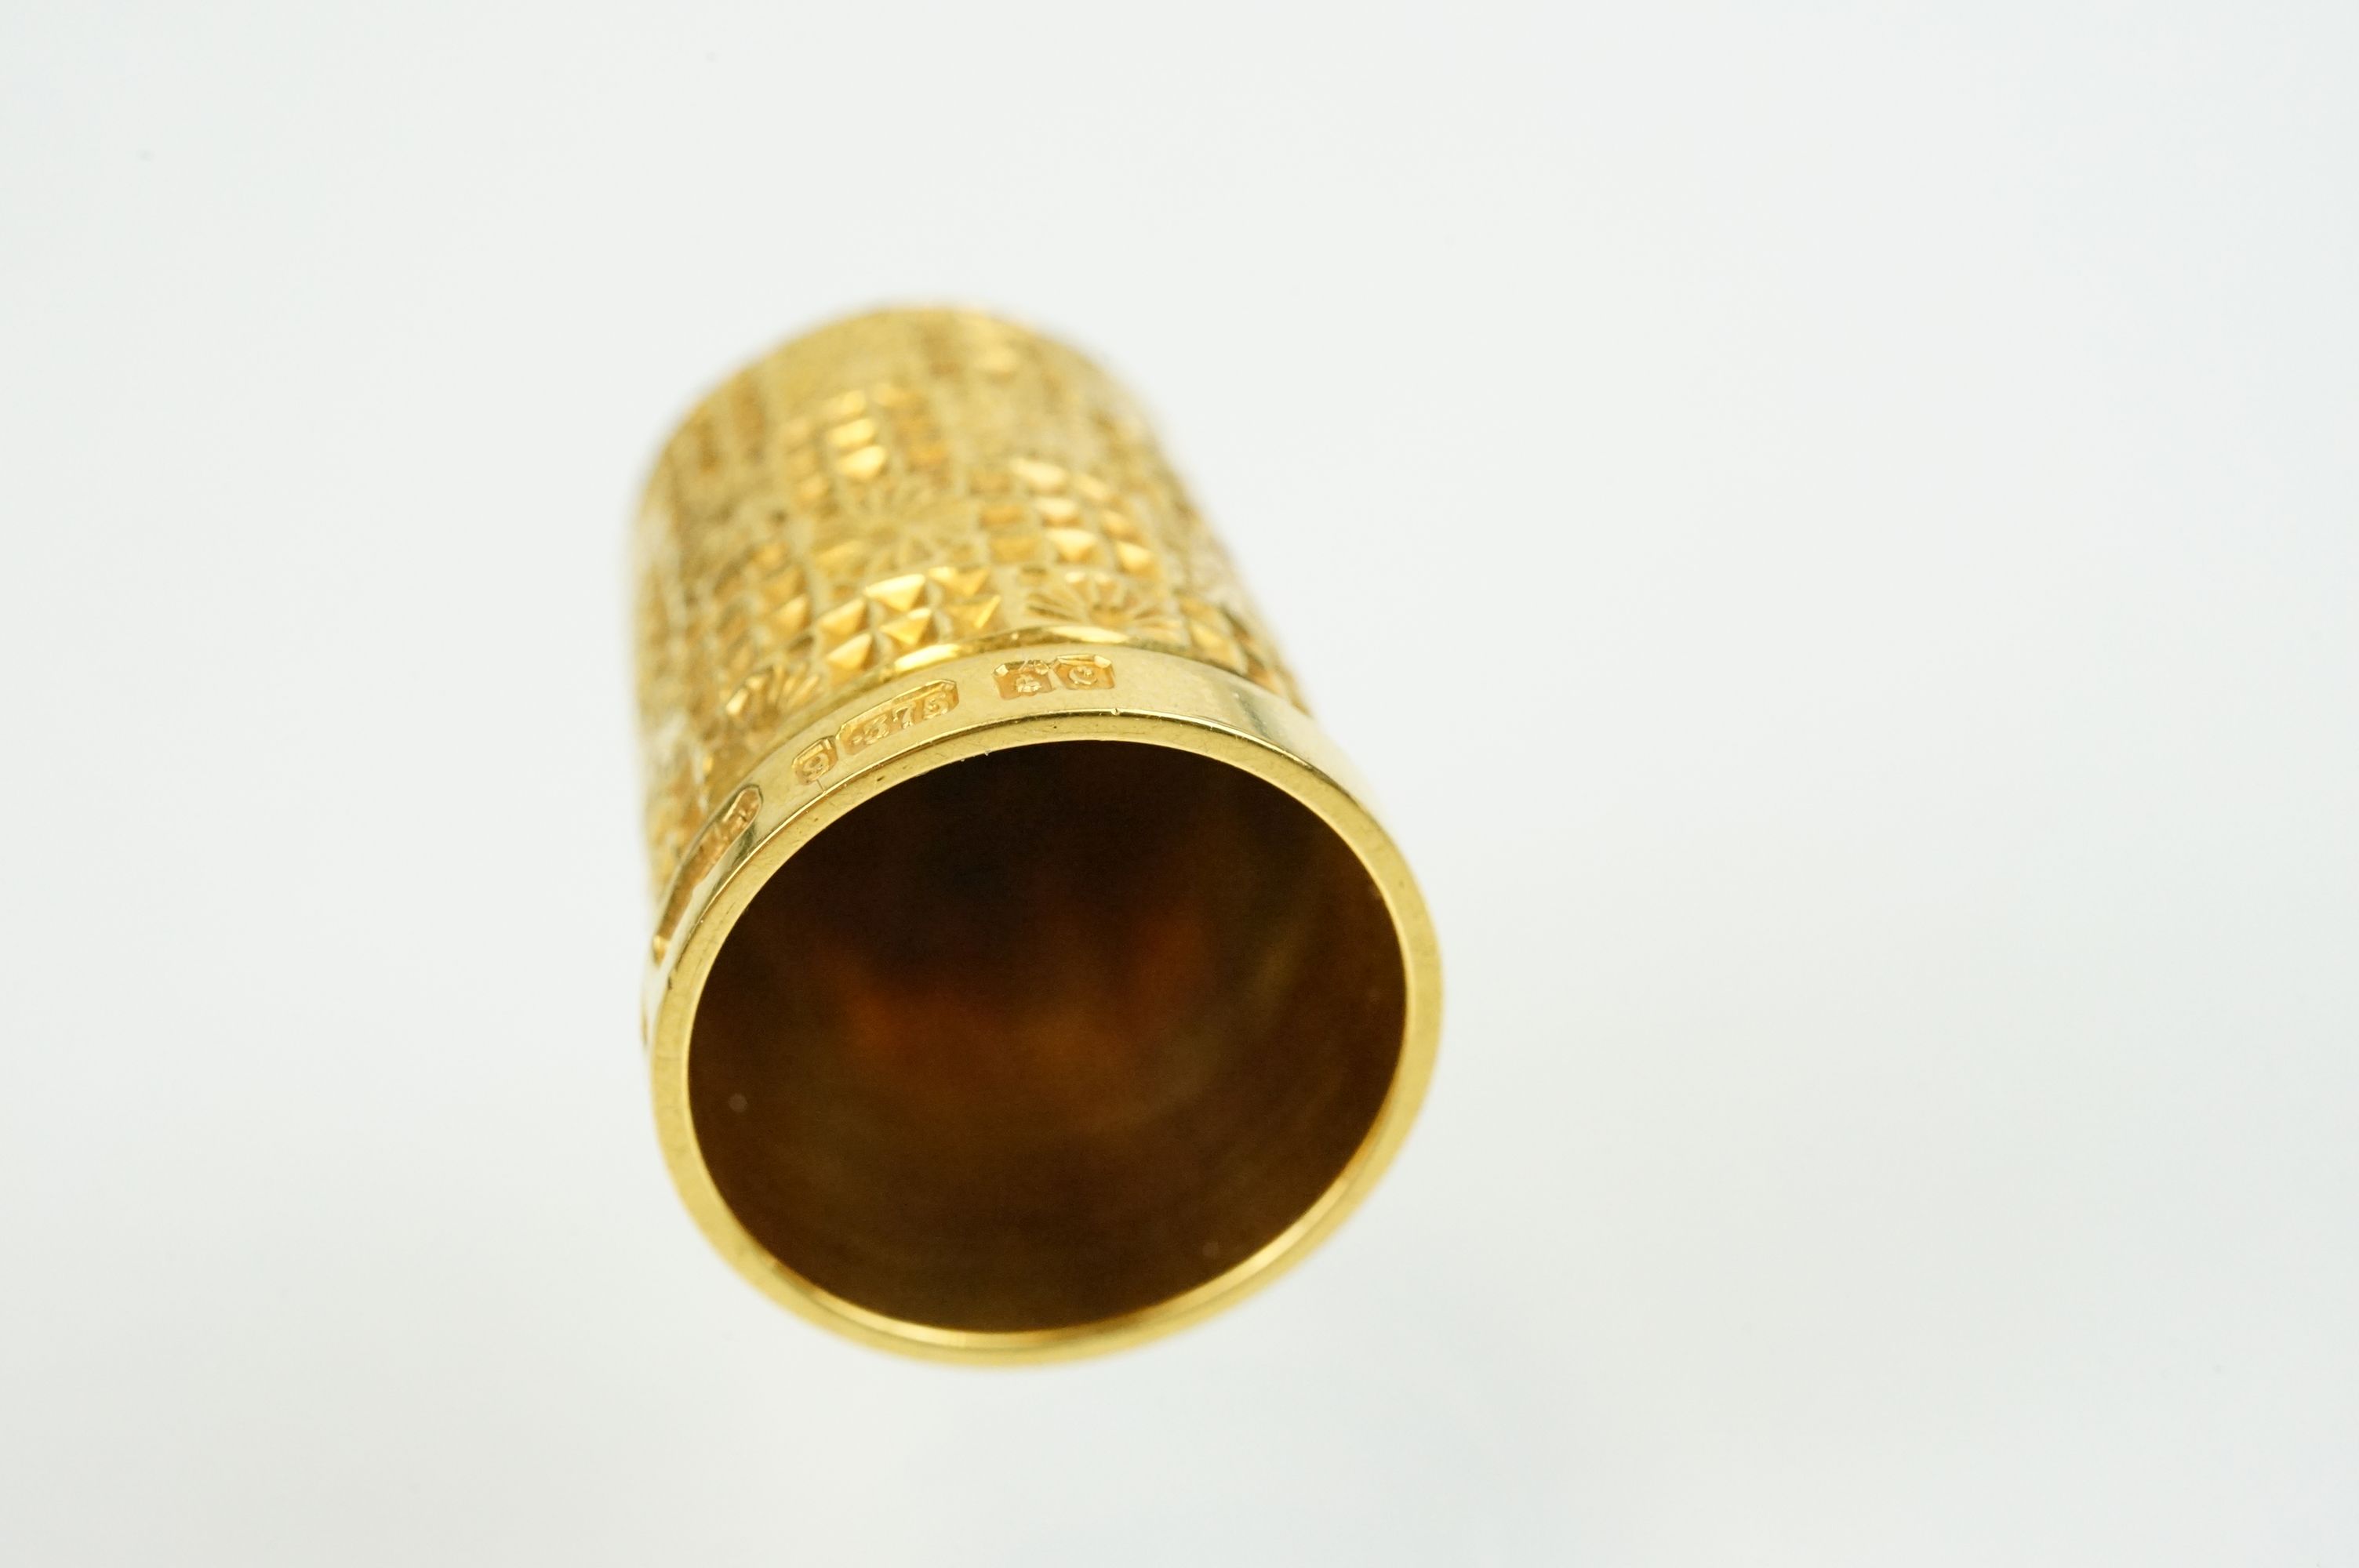 9ct gold hallmarked thimble with moulded details, size 15. Hallmarked Birmingham 1902, HG & S Ltd. - Image 2 of 4